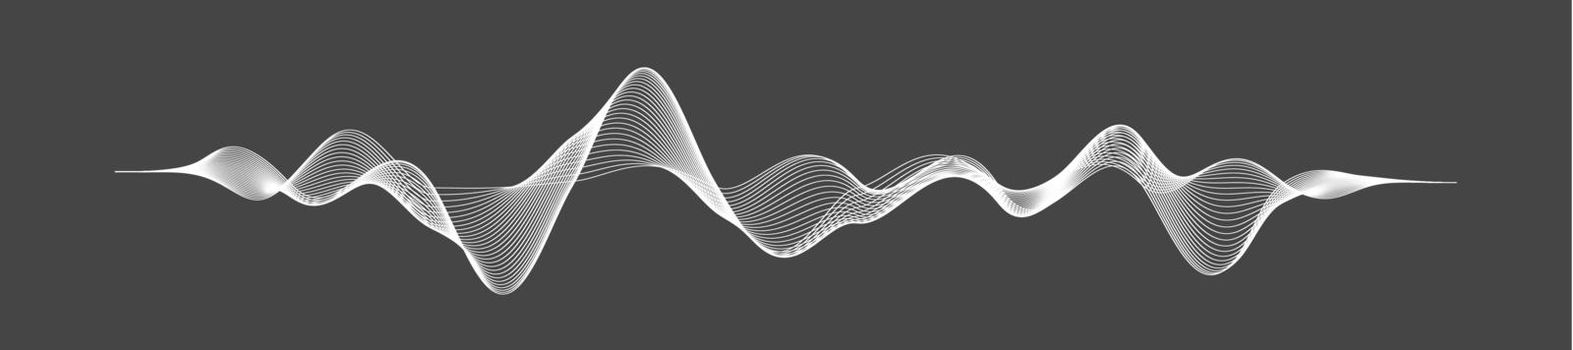 Radio waves vector. Radio frequency identification. Wireless communication. Sound waves abstract vector illustration